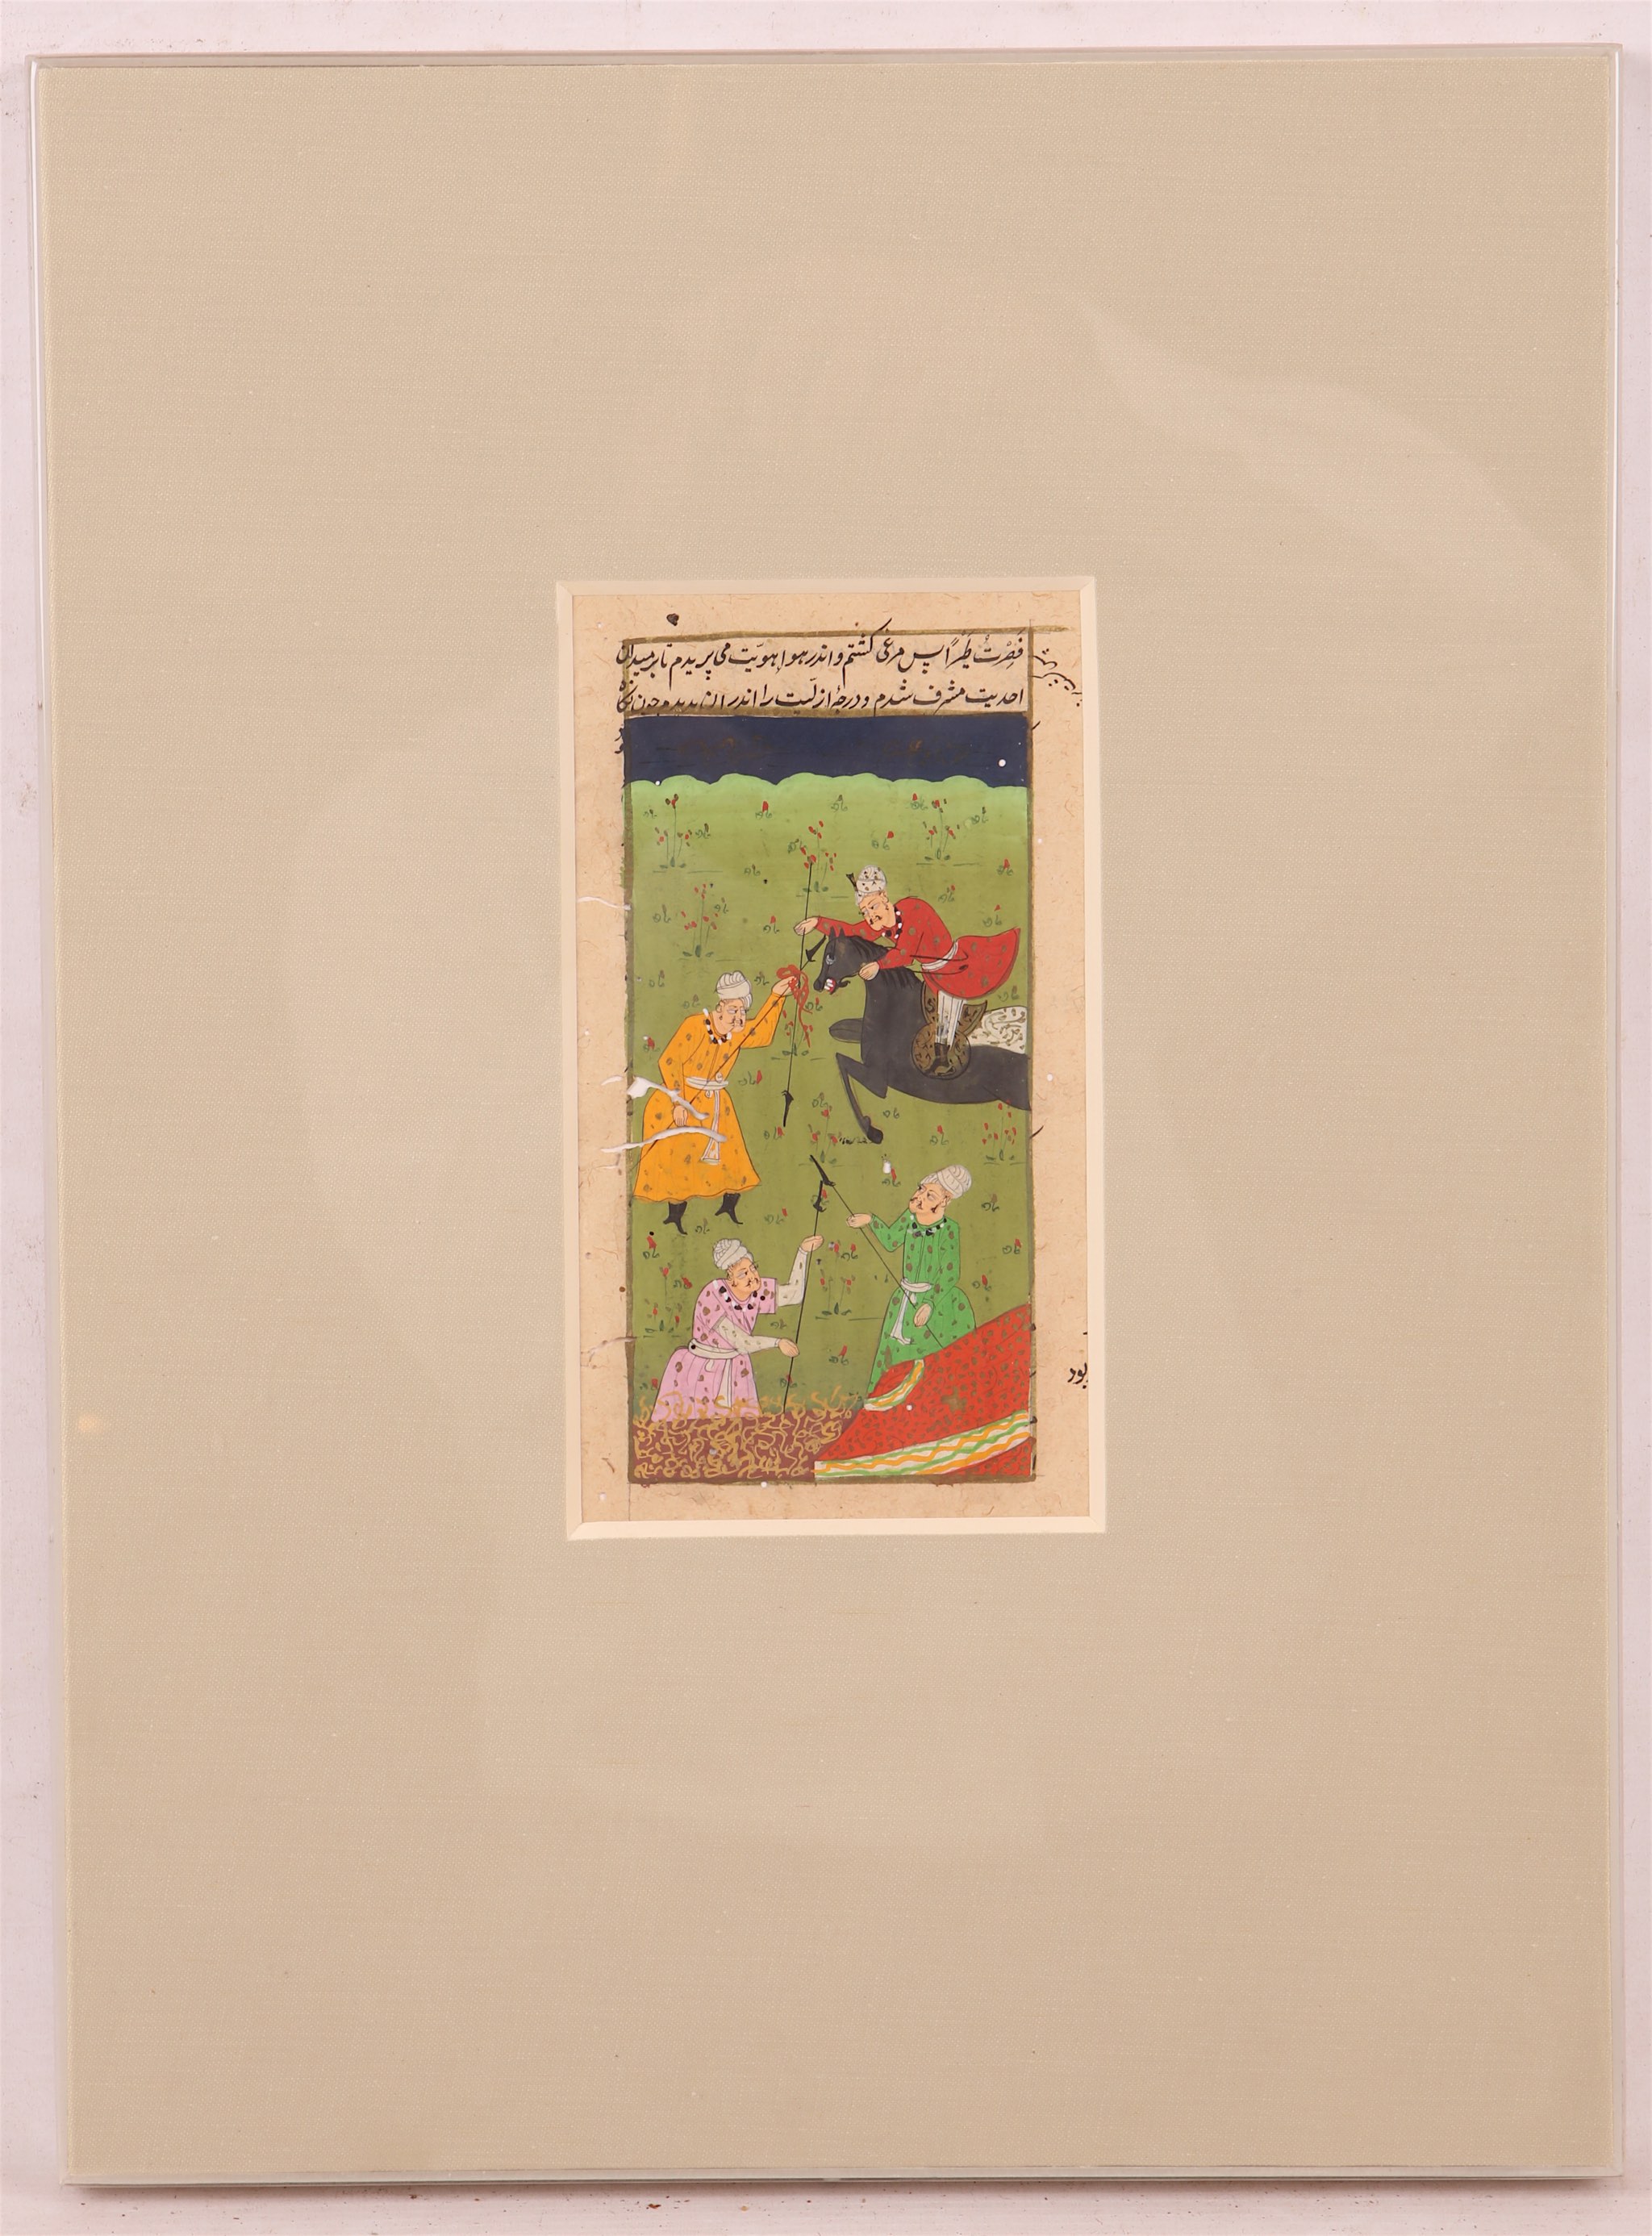 Four 19th century hand painted Indian pictures, studies of Elephant on a Tiger hunt, practice with - Image 3 of 8